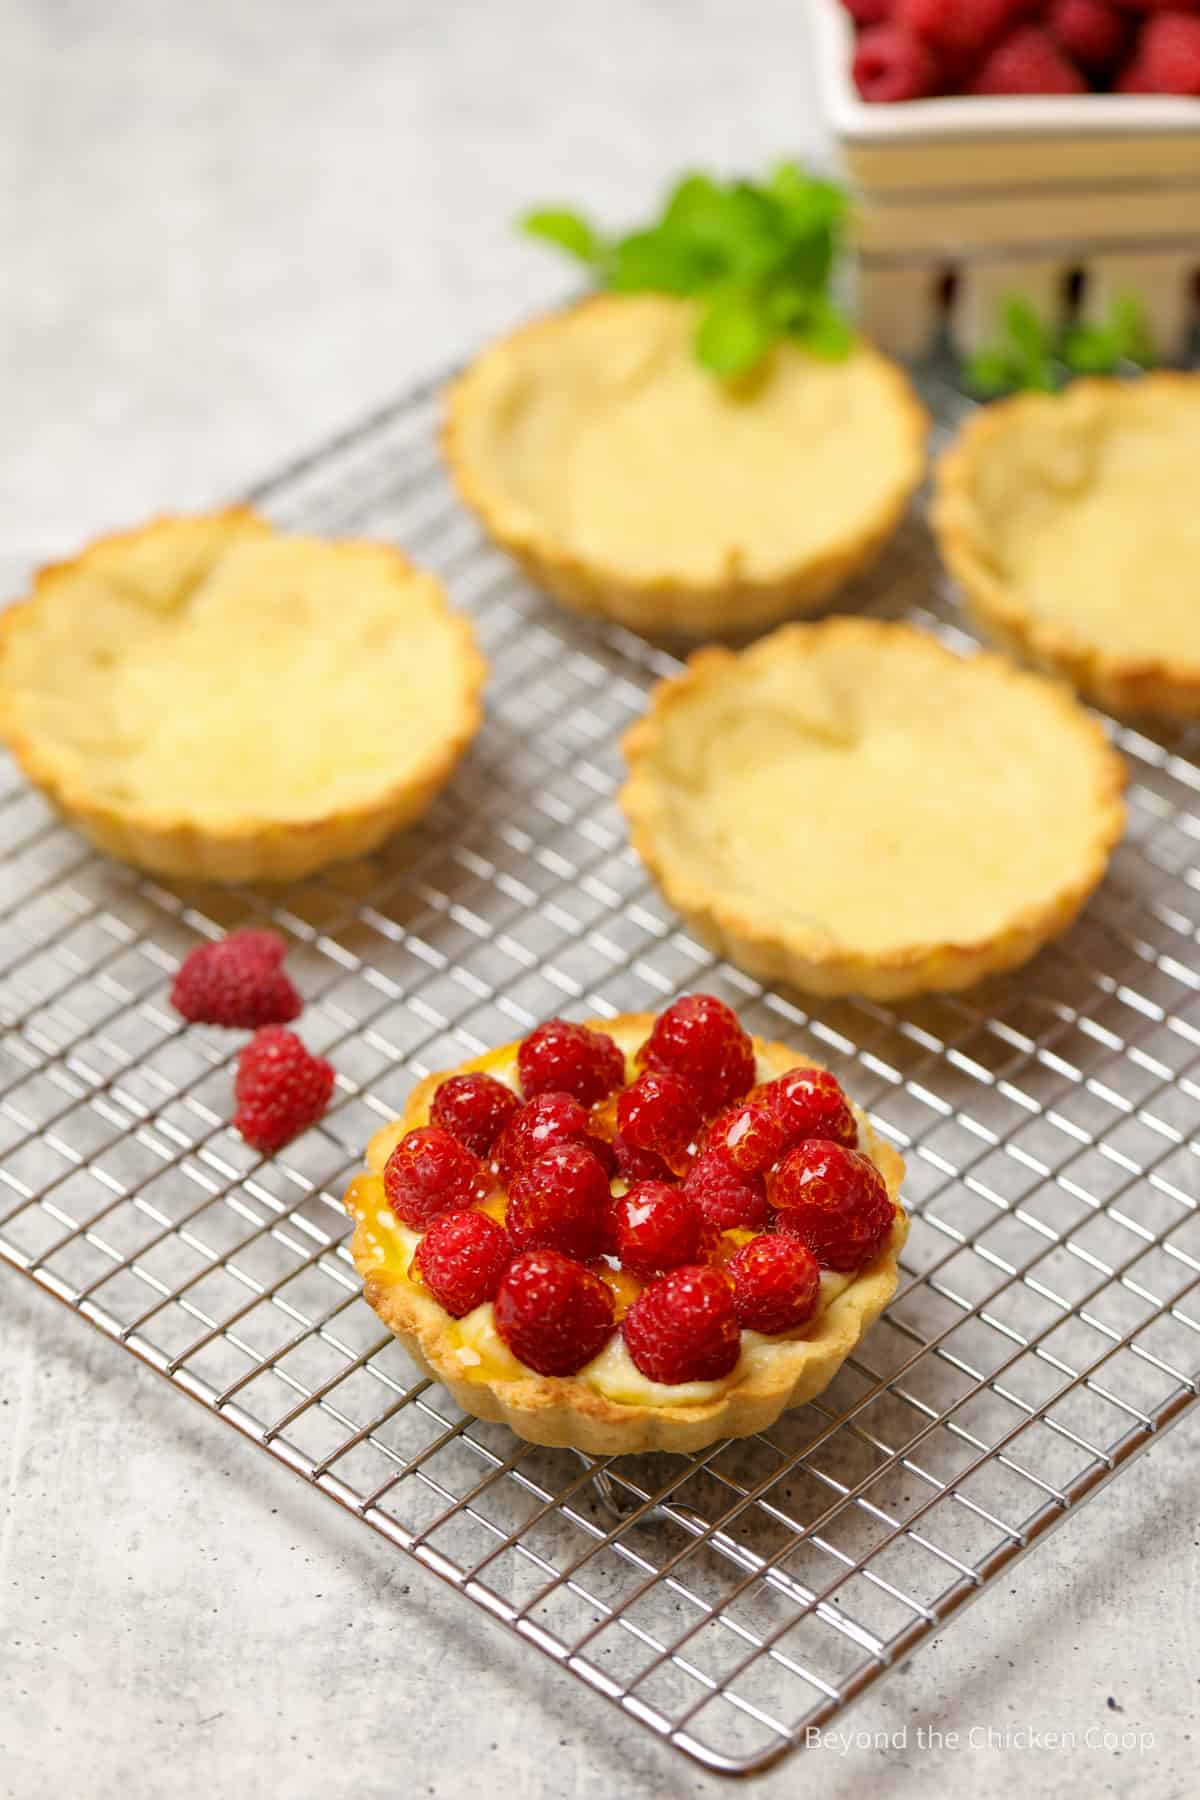 A tart filled with raspberries.